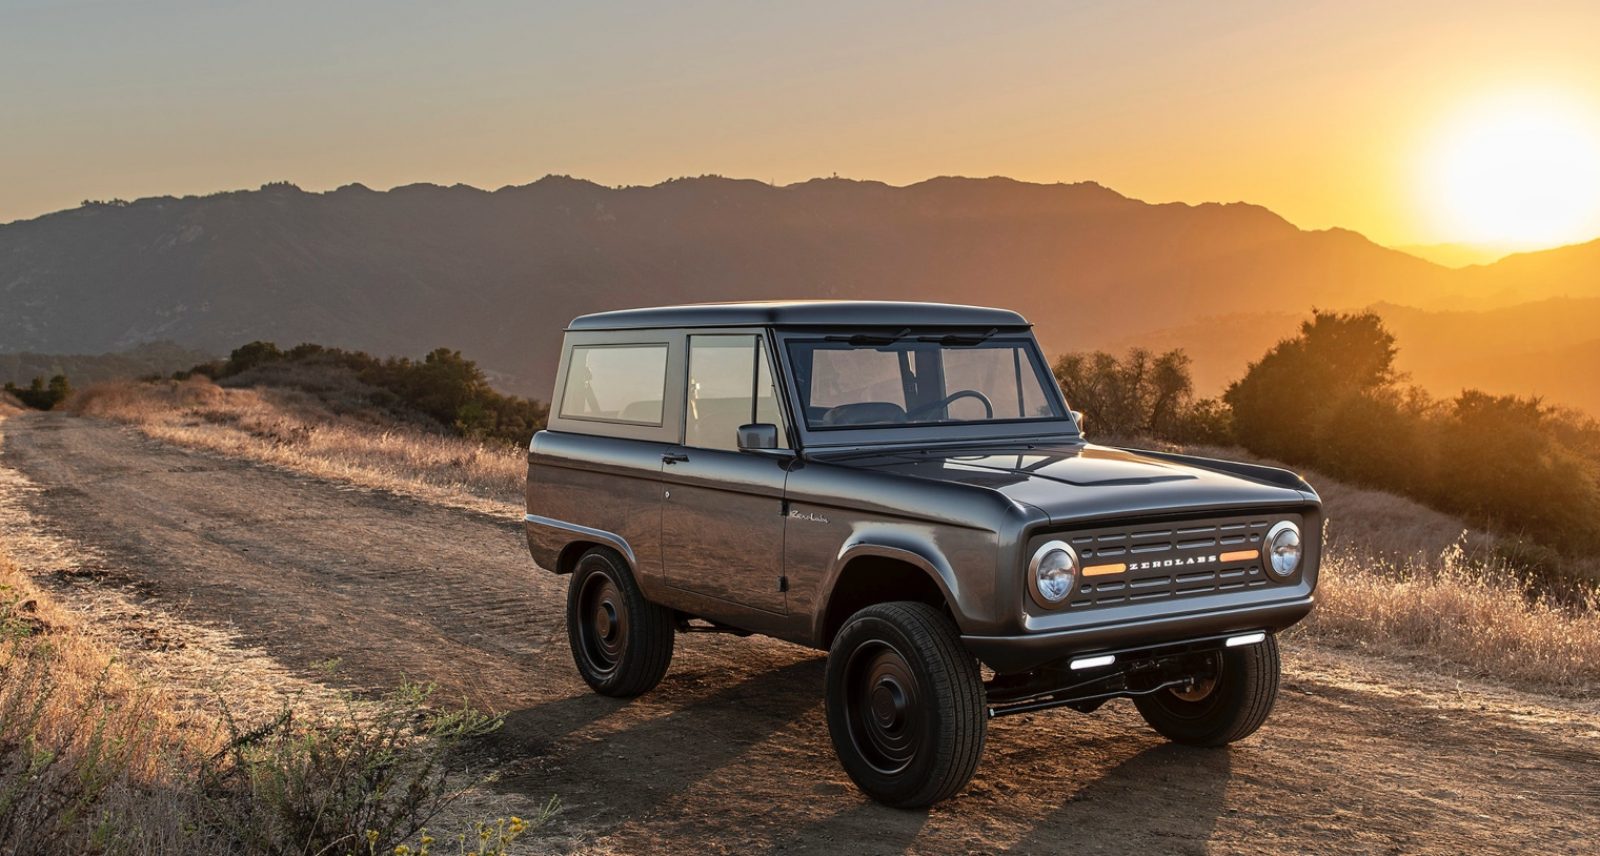 What's Cooler Than the New Bronco? These All-Electric Classics